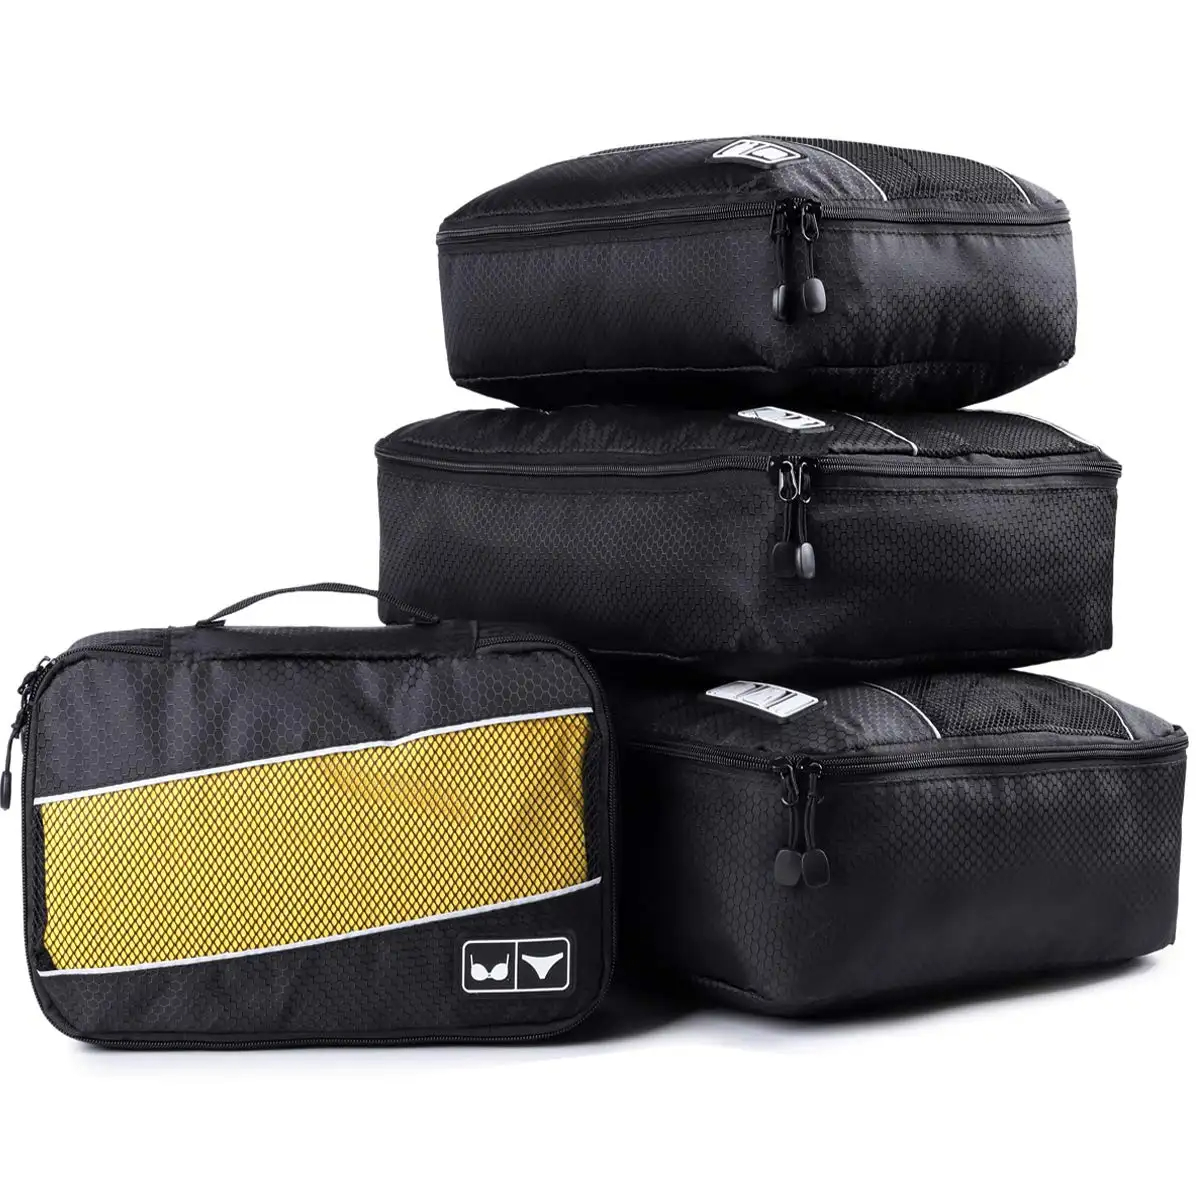 WellPromotion Best Packing Cubes for Carry on